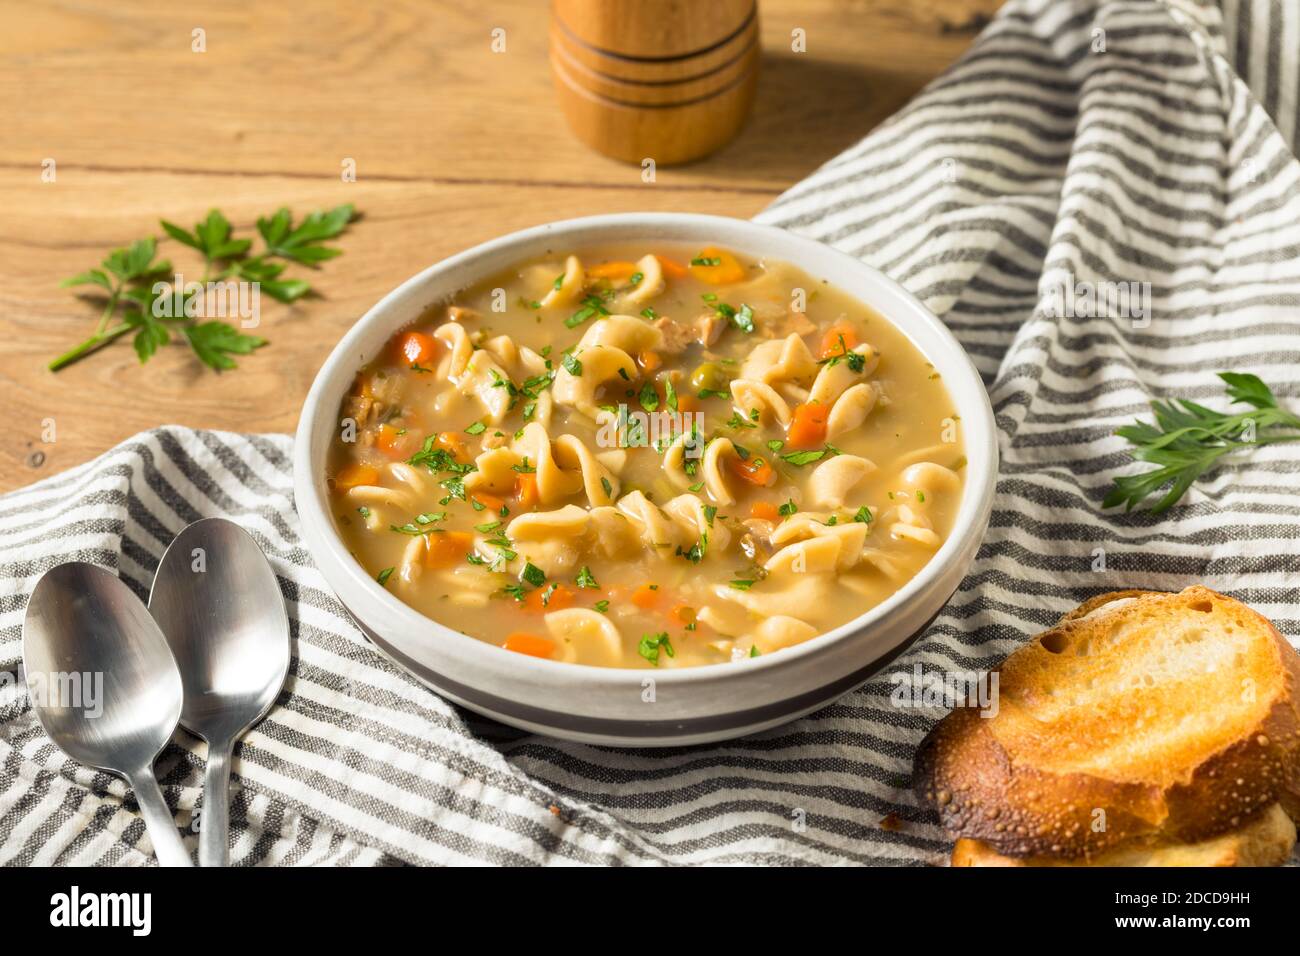 Homemade Chicken Noodle Soup with Peas and Carrots Stock Photo